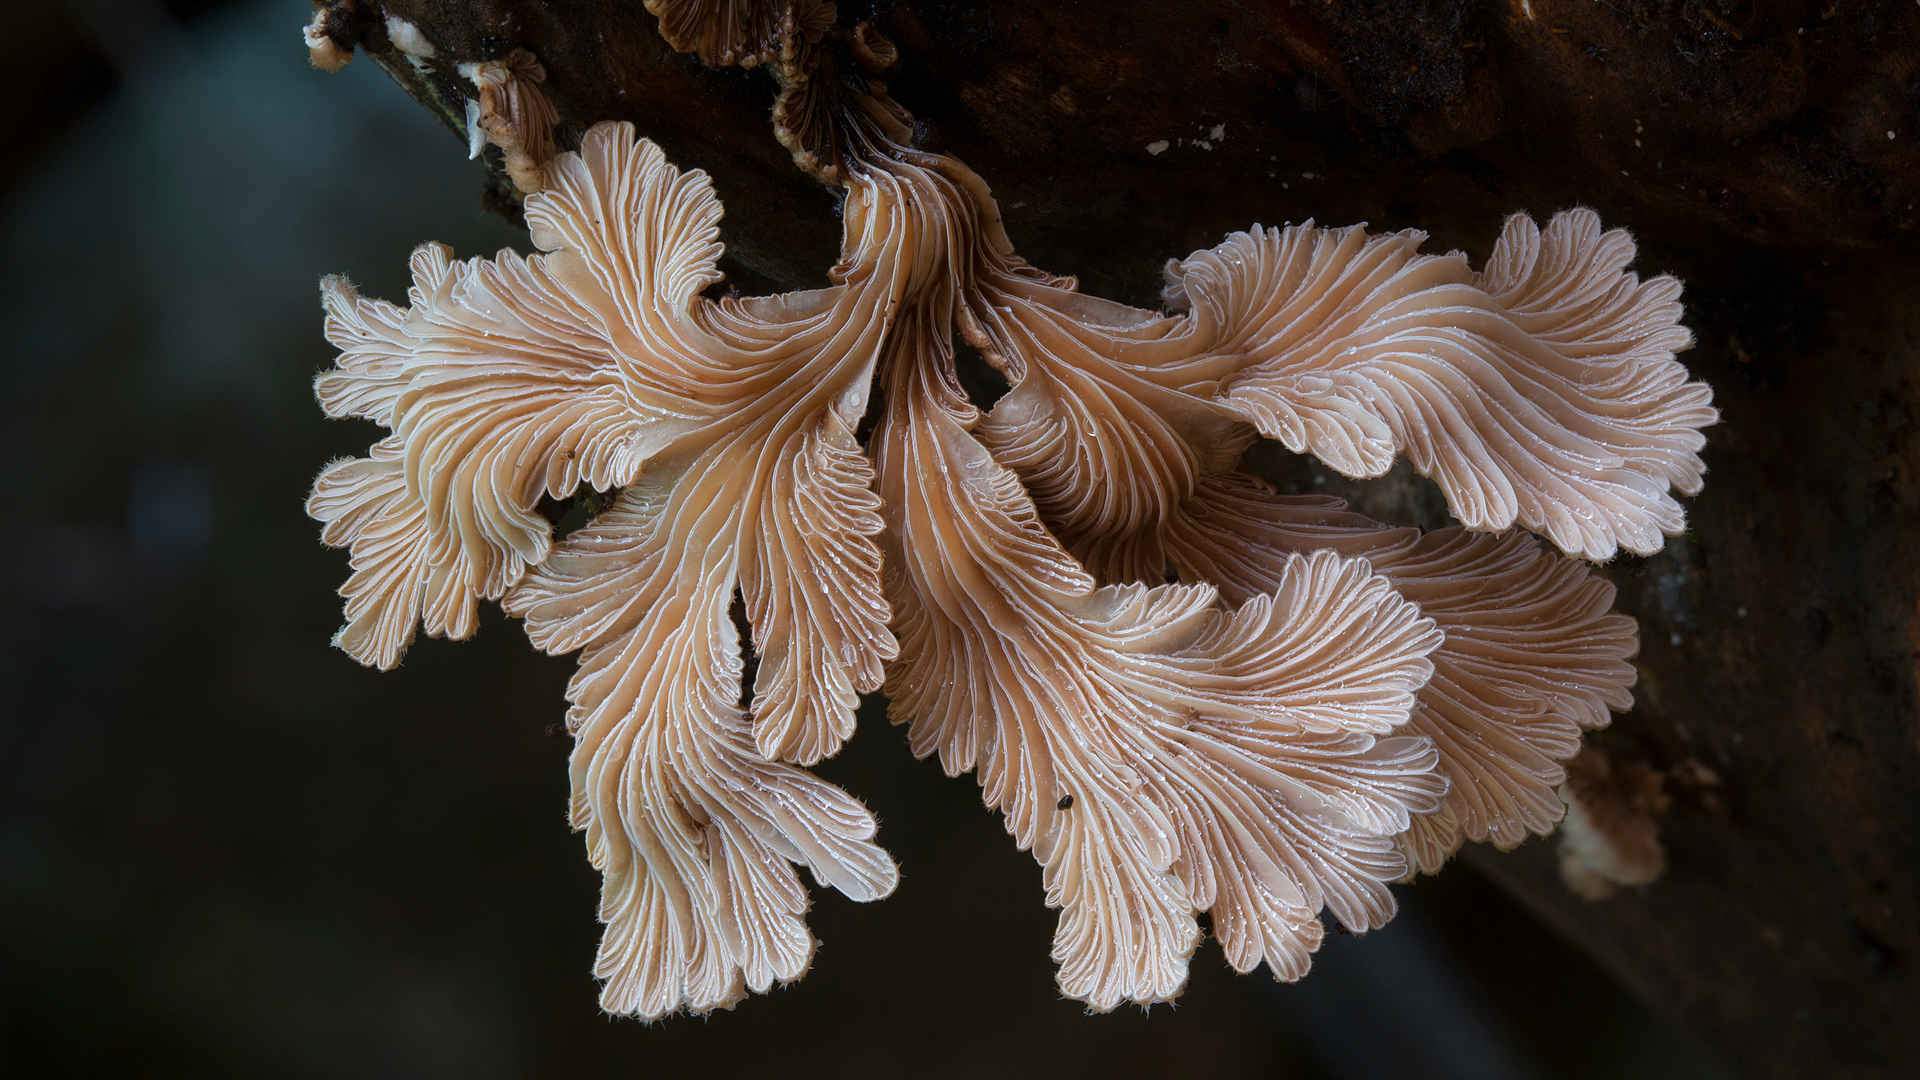 'The Kingdom: How Fungi Made the World' Screening and Q&A